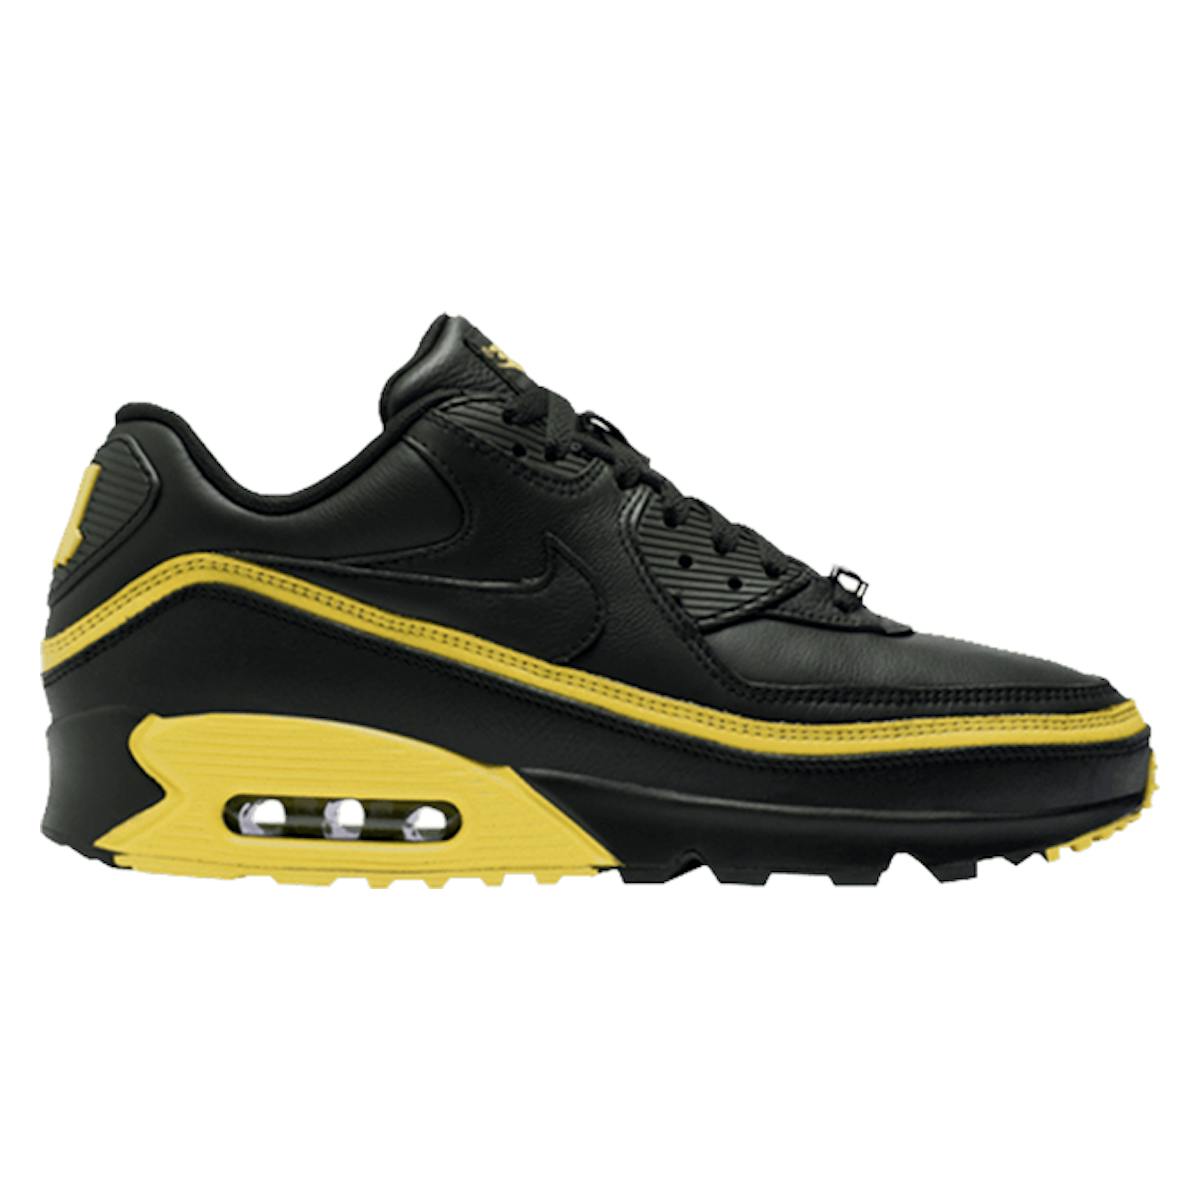 Undefeated x Nike Air Max 90 "Black Optic Yellow"